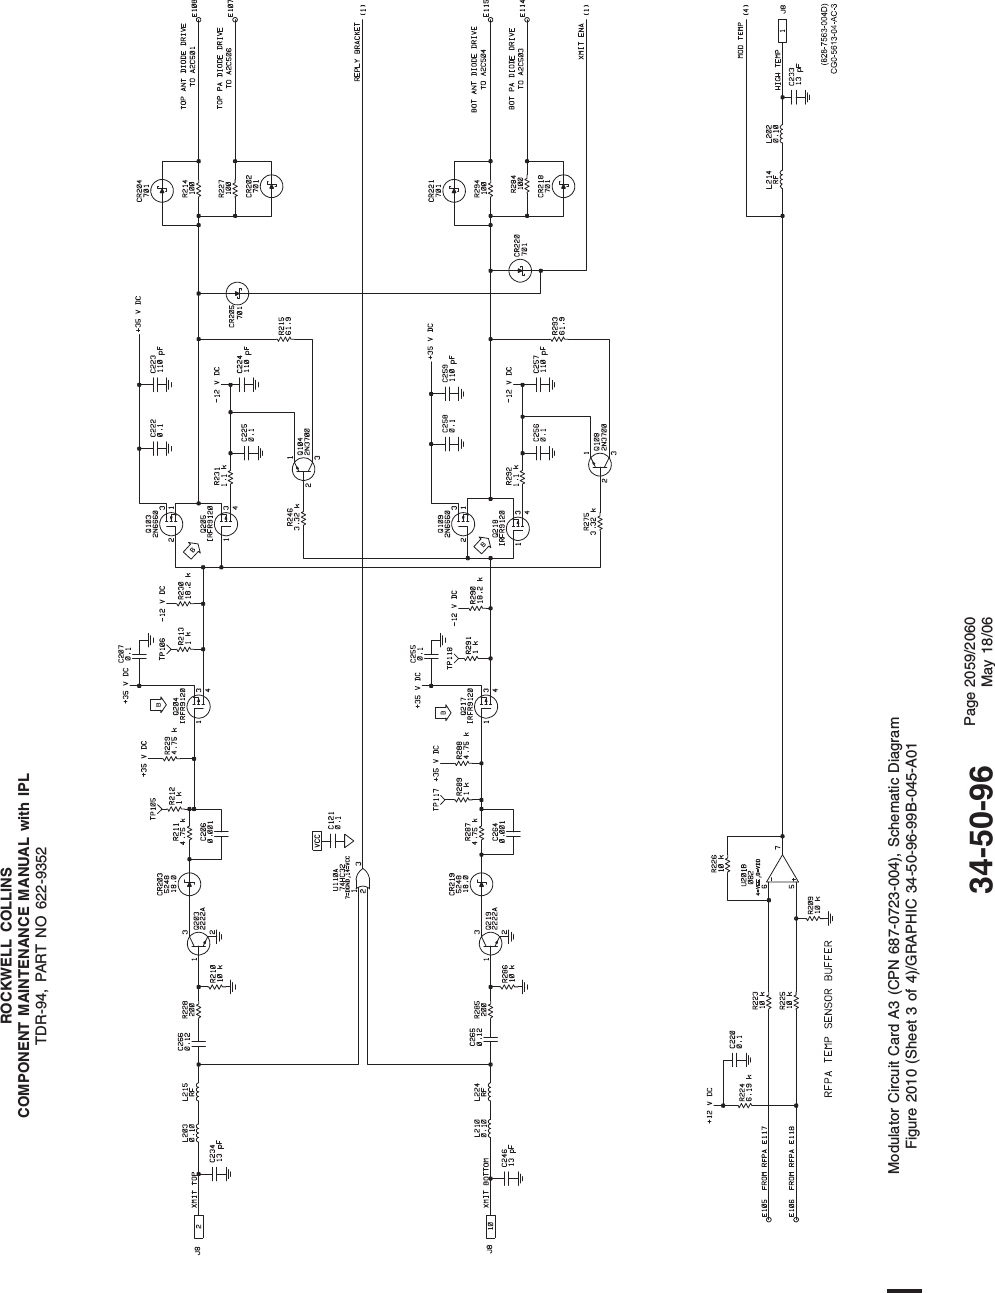 ROCKWELL COLLINSCOMPONENT MAINTENANCE MANUAL with IPLTDR-94, PART NO 622-9352Modulator Circuit Card A3 (CPN 687-0723-004), Schematic DiagramFigure 2010 (Sheet 3 of 4)/GRAPHIC 34-50-96-99B-045-A0134-50-96 Page 2059/2060May 18/06